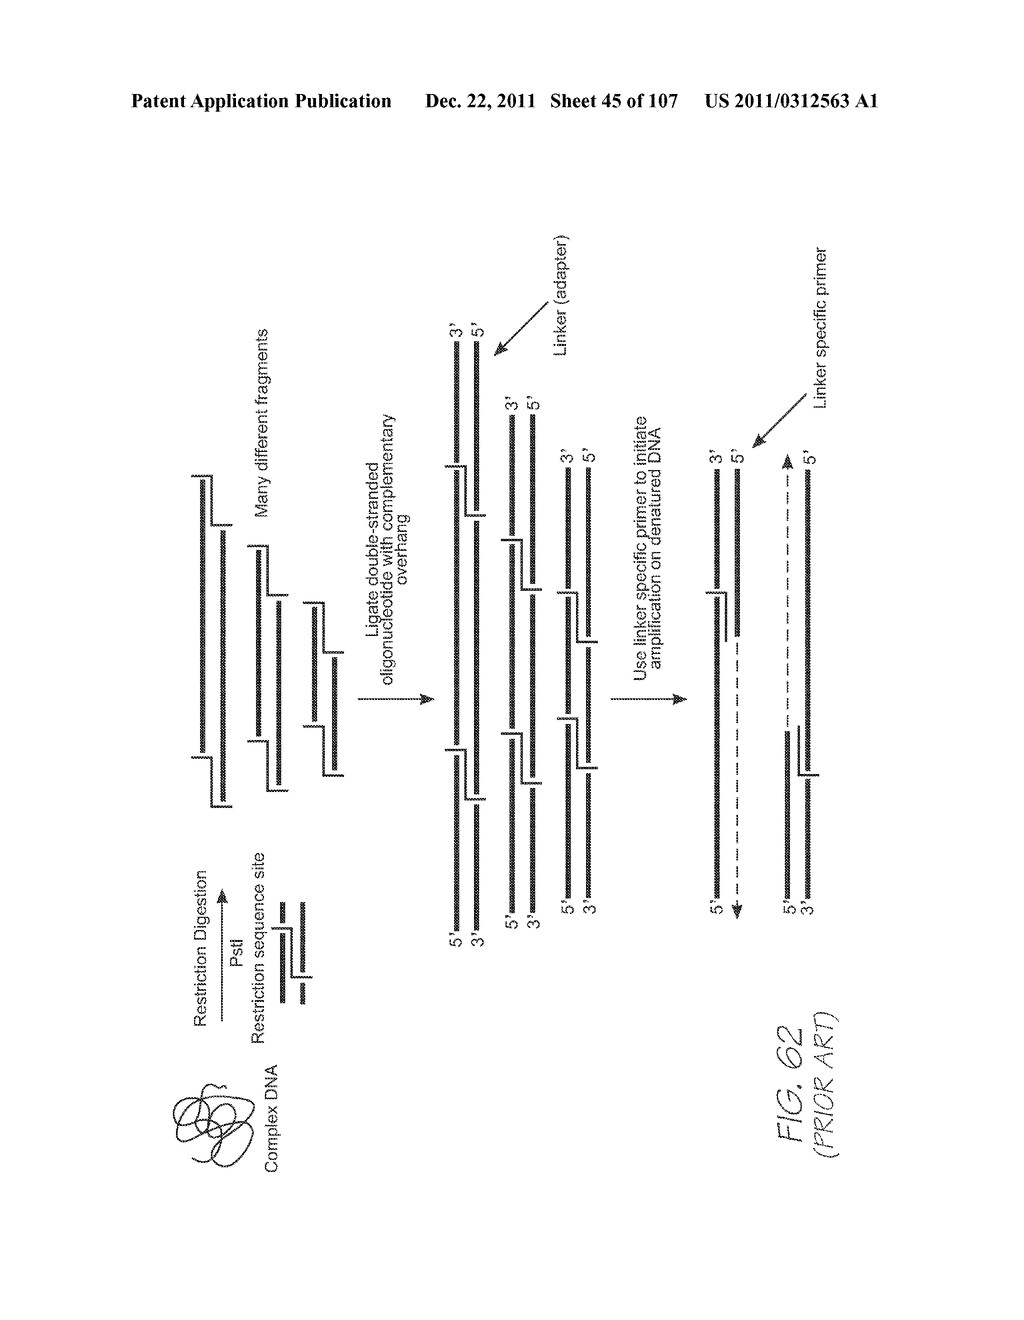 LOC DEVICE FOR DETECTING TARGET NUCLEIC ACID SEQUENCES IN A FLUID USING     HYBRIDIZATION CHAMBER ARRAY AND NEGATIVE CONTROL CHAMBER CONTAINING     ELECTROCHEMILUMINESCENT PROBE DESIGNED TO BE NON-COMPLEMENTARY TO ANY     SEQUENCE IN THE FLUID - diagram, schematic, and image 46